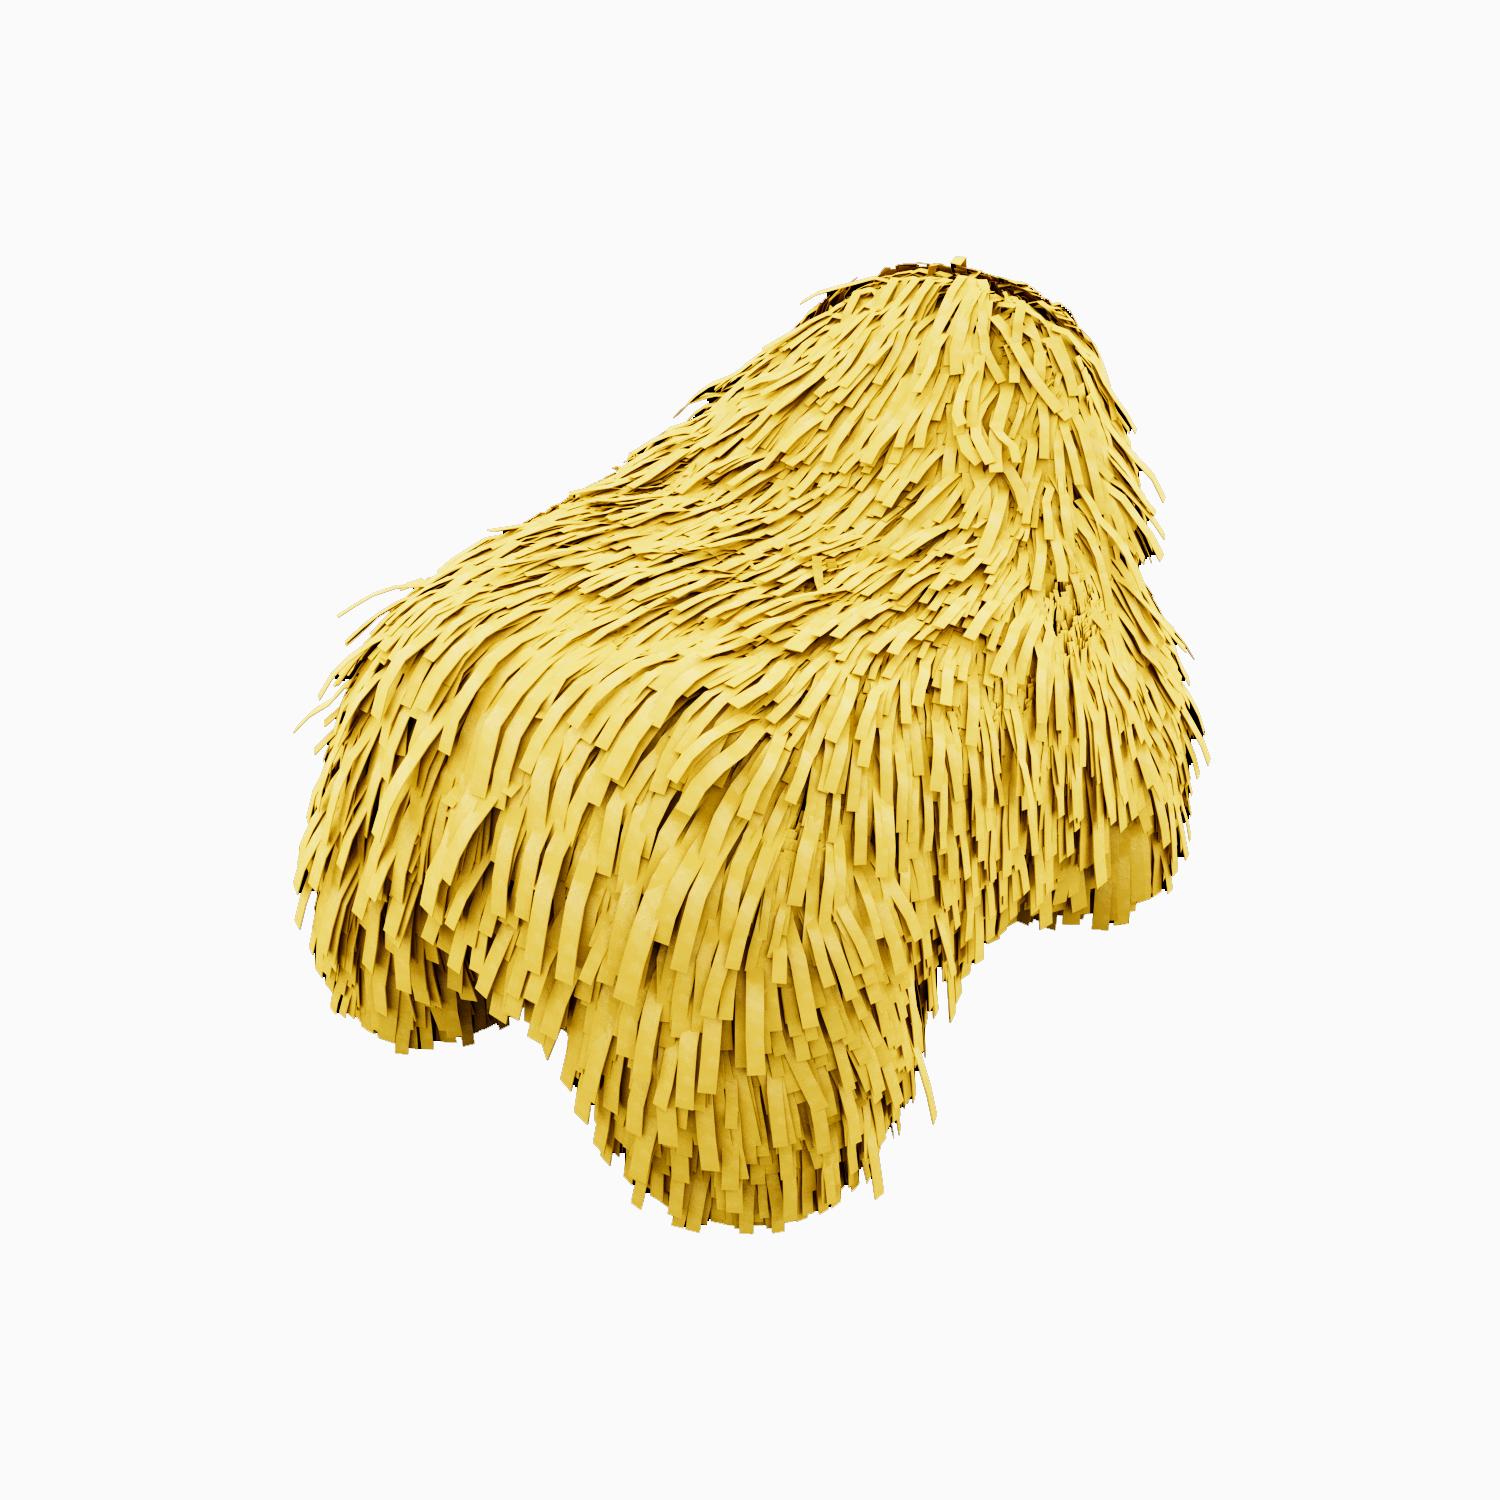 Puppy Pouffe Yellow is a hip little seat with luxurious shaggy suede. This cute piece of furniture is a delight around the house like a new pup

For his debut creations, Marcantonio introduced “Vegetal Animal”, a concept that evokes strong